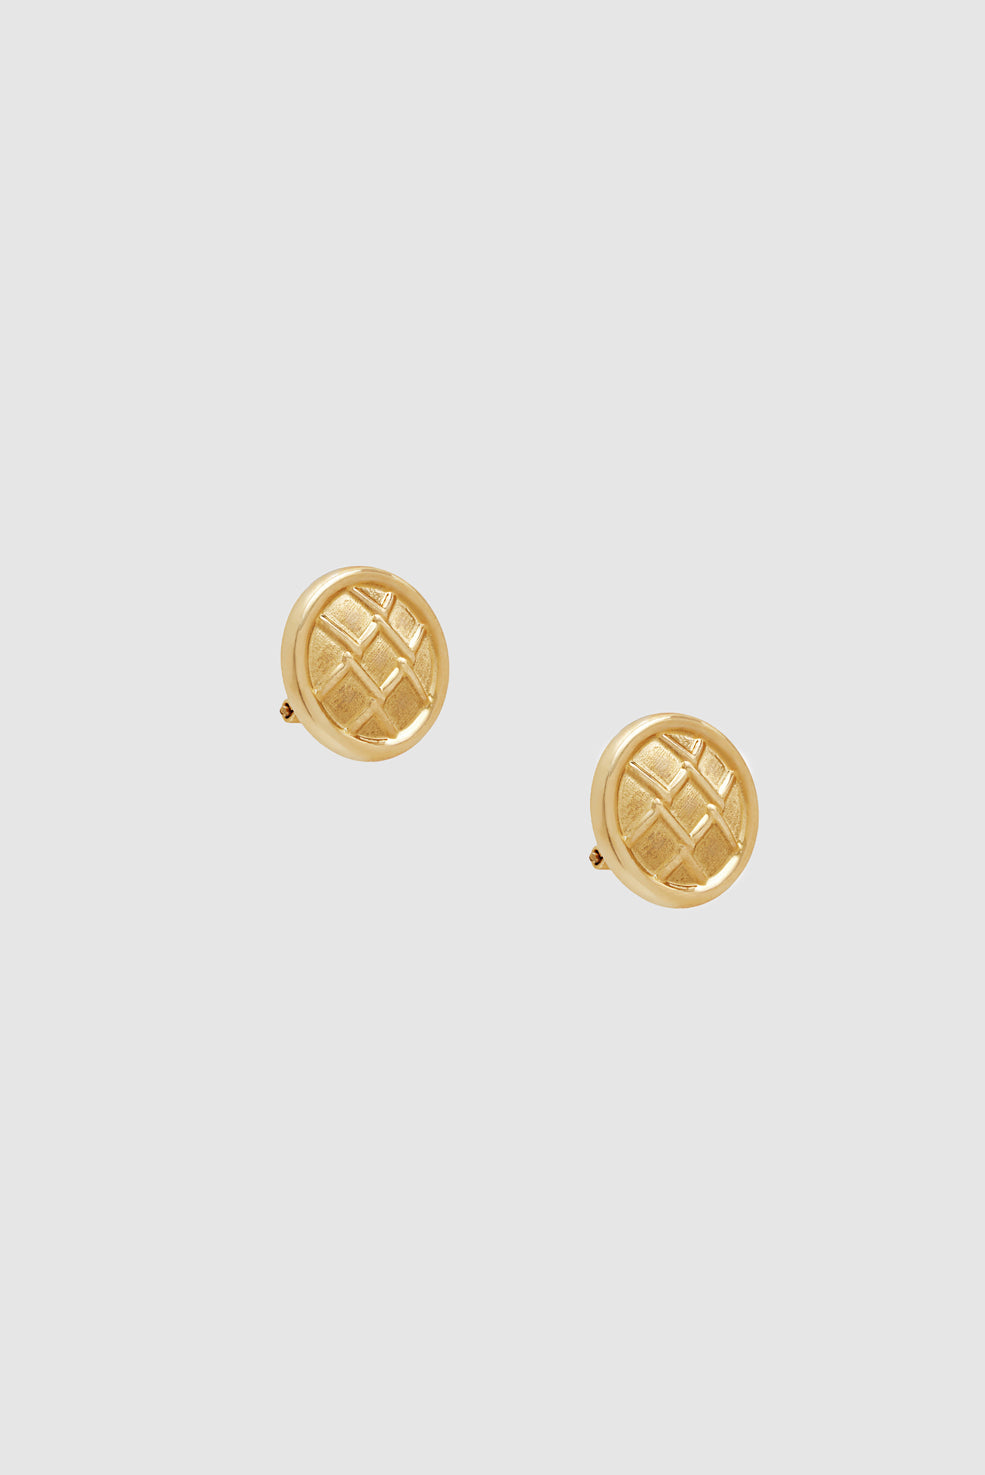 ANINE BING Textured Button Stud Earrings - 14K Gold - Front View